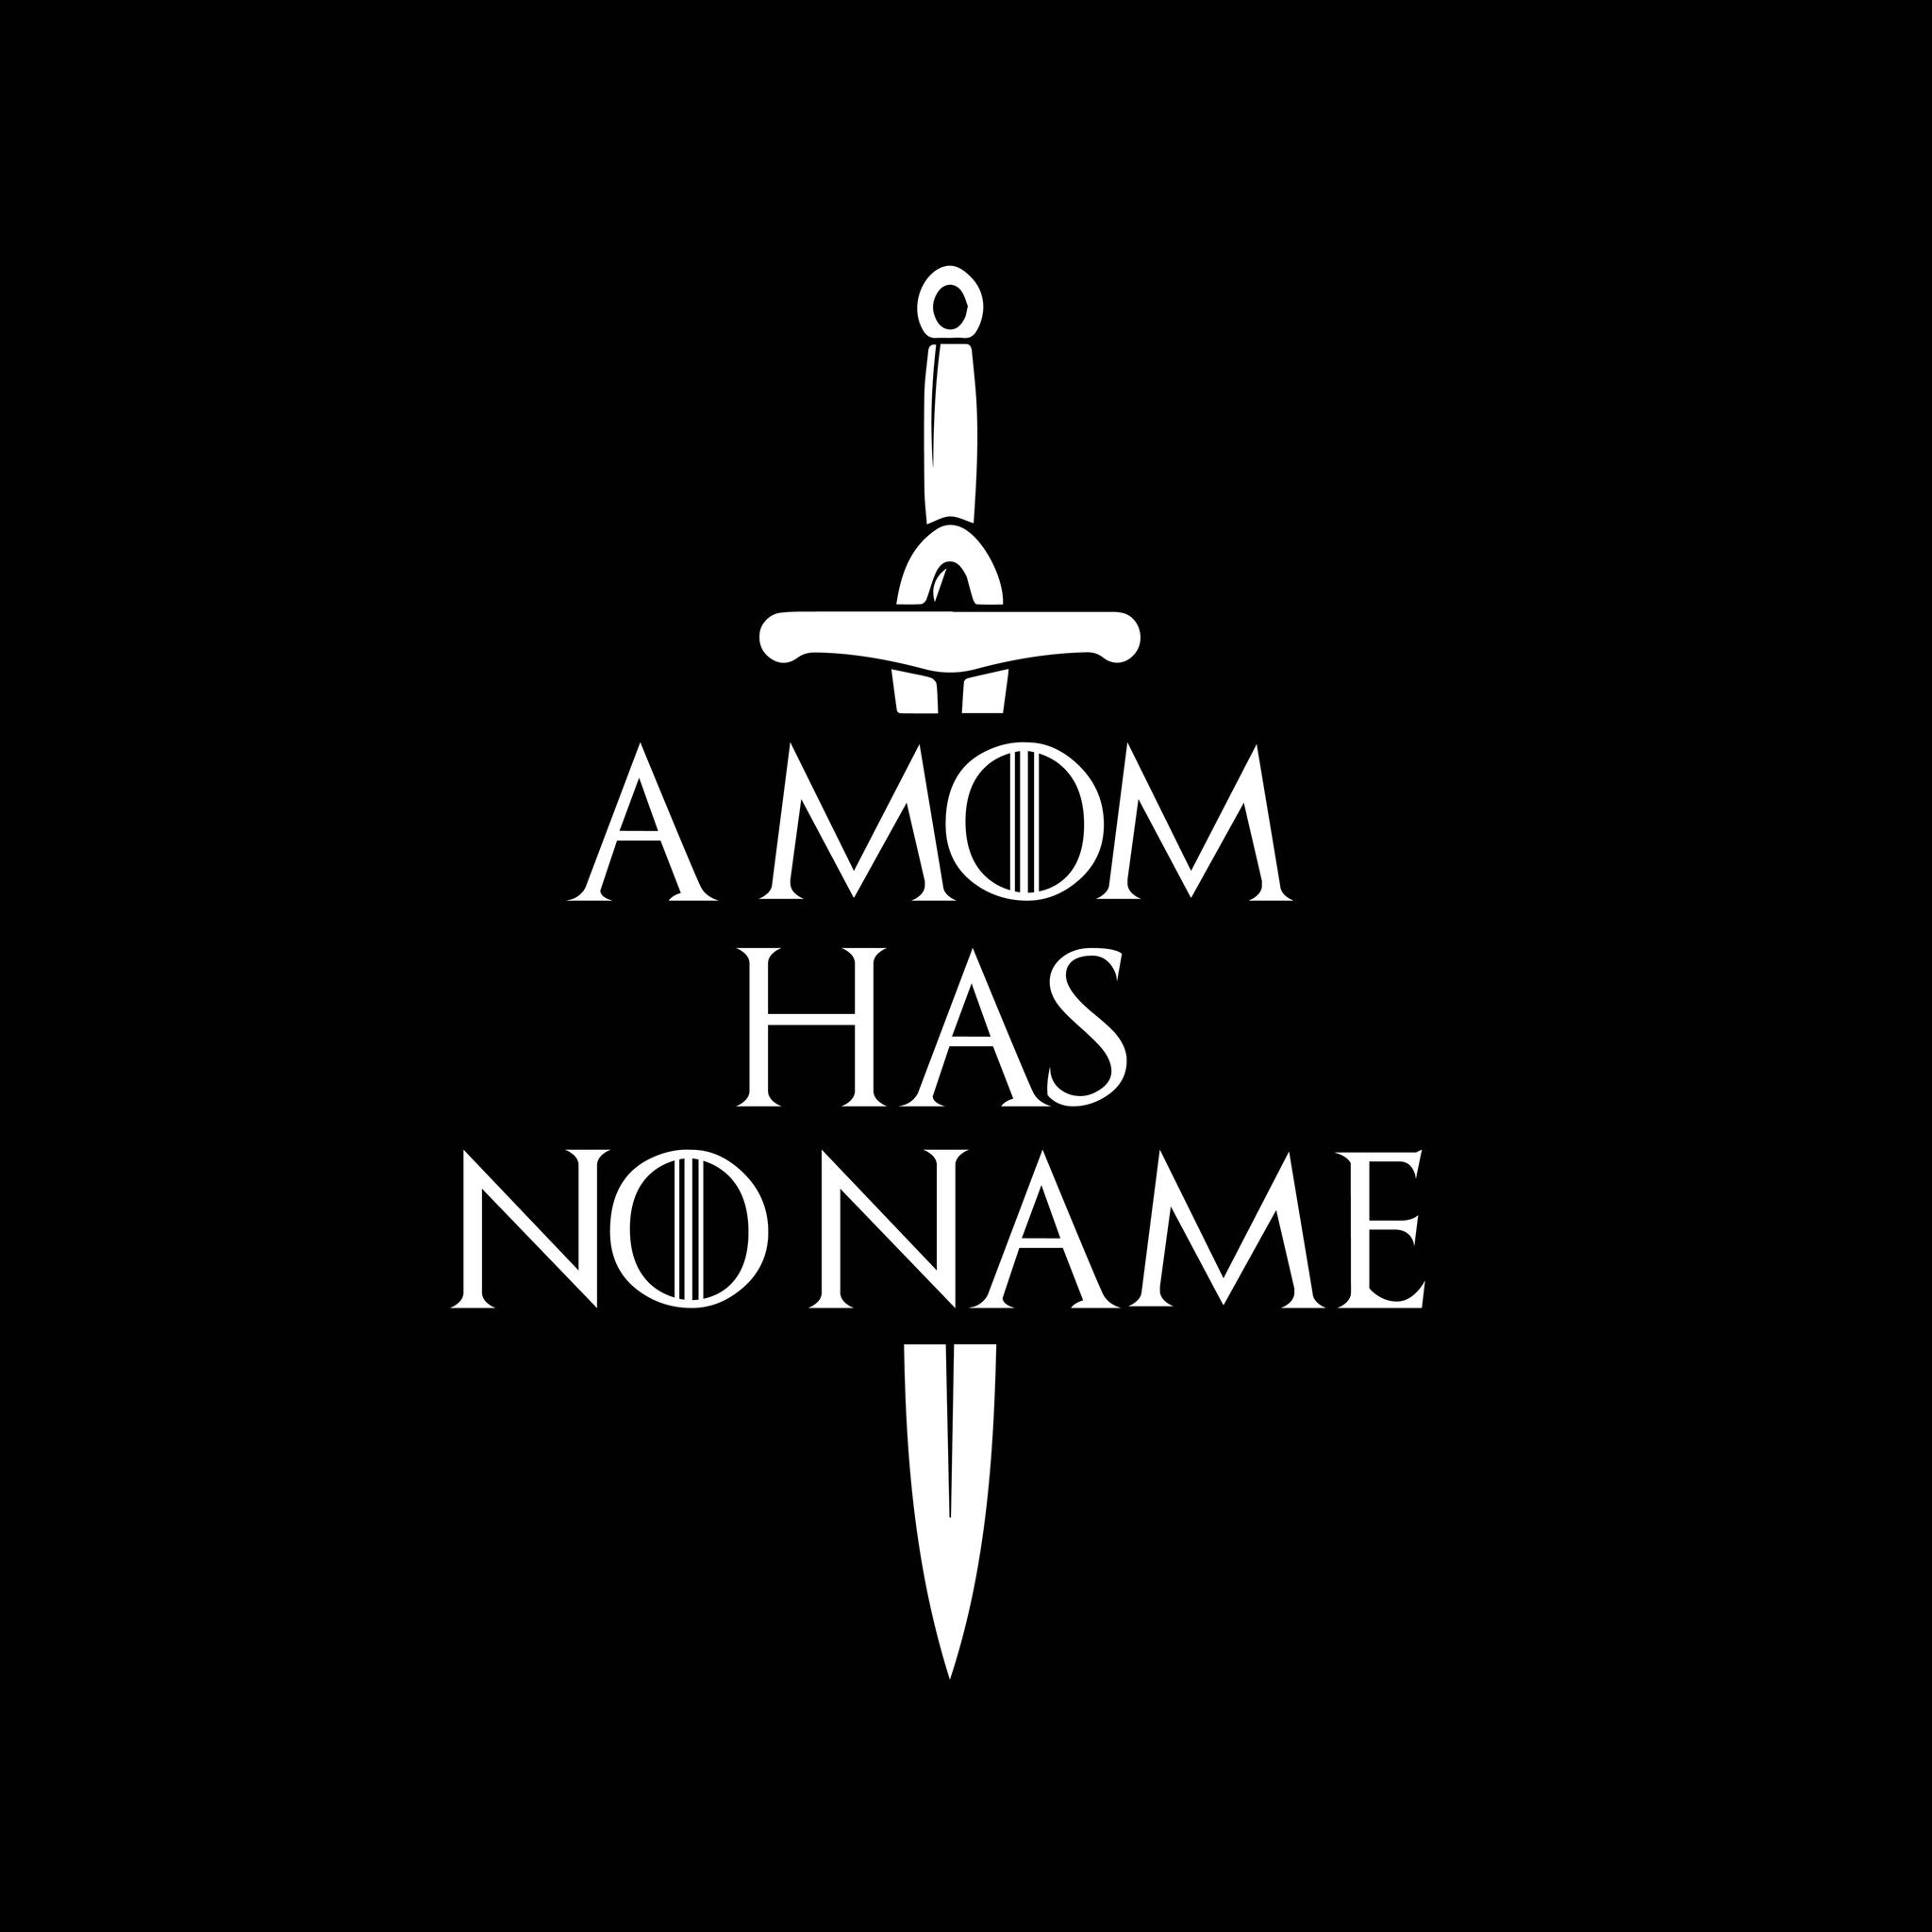 A Mom Has No Name, Game of Thrones svg, Game of Thrones clipart, Game of Thrones silhouette svg, png, dxf, eps file